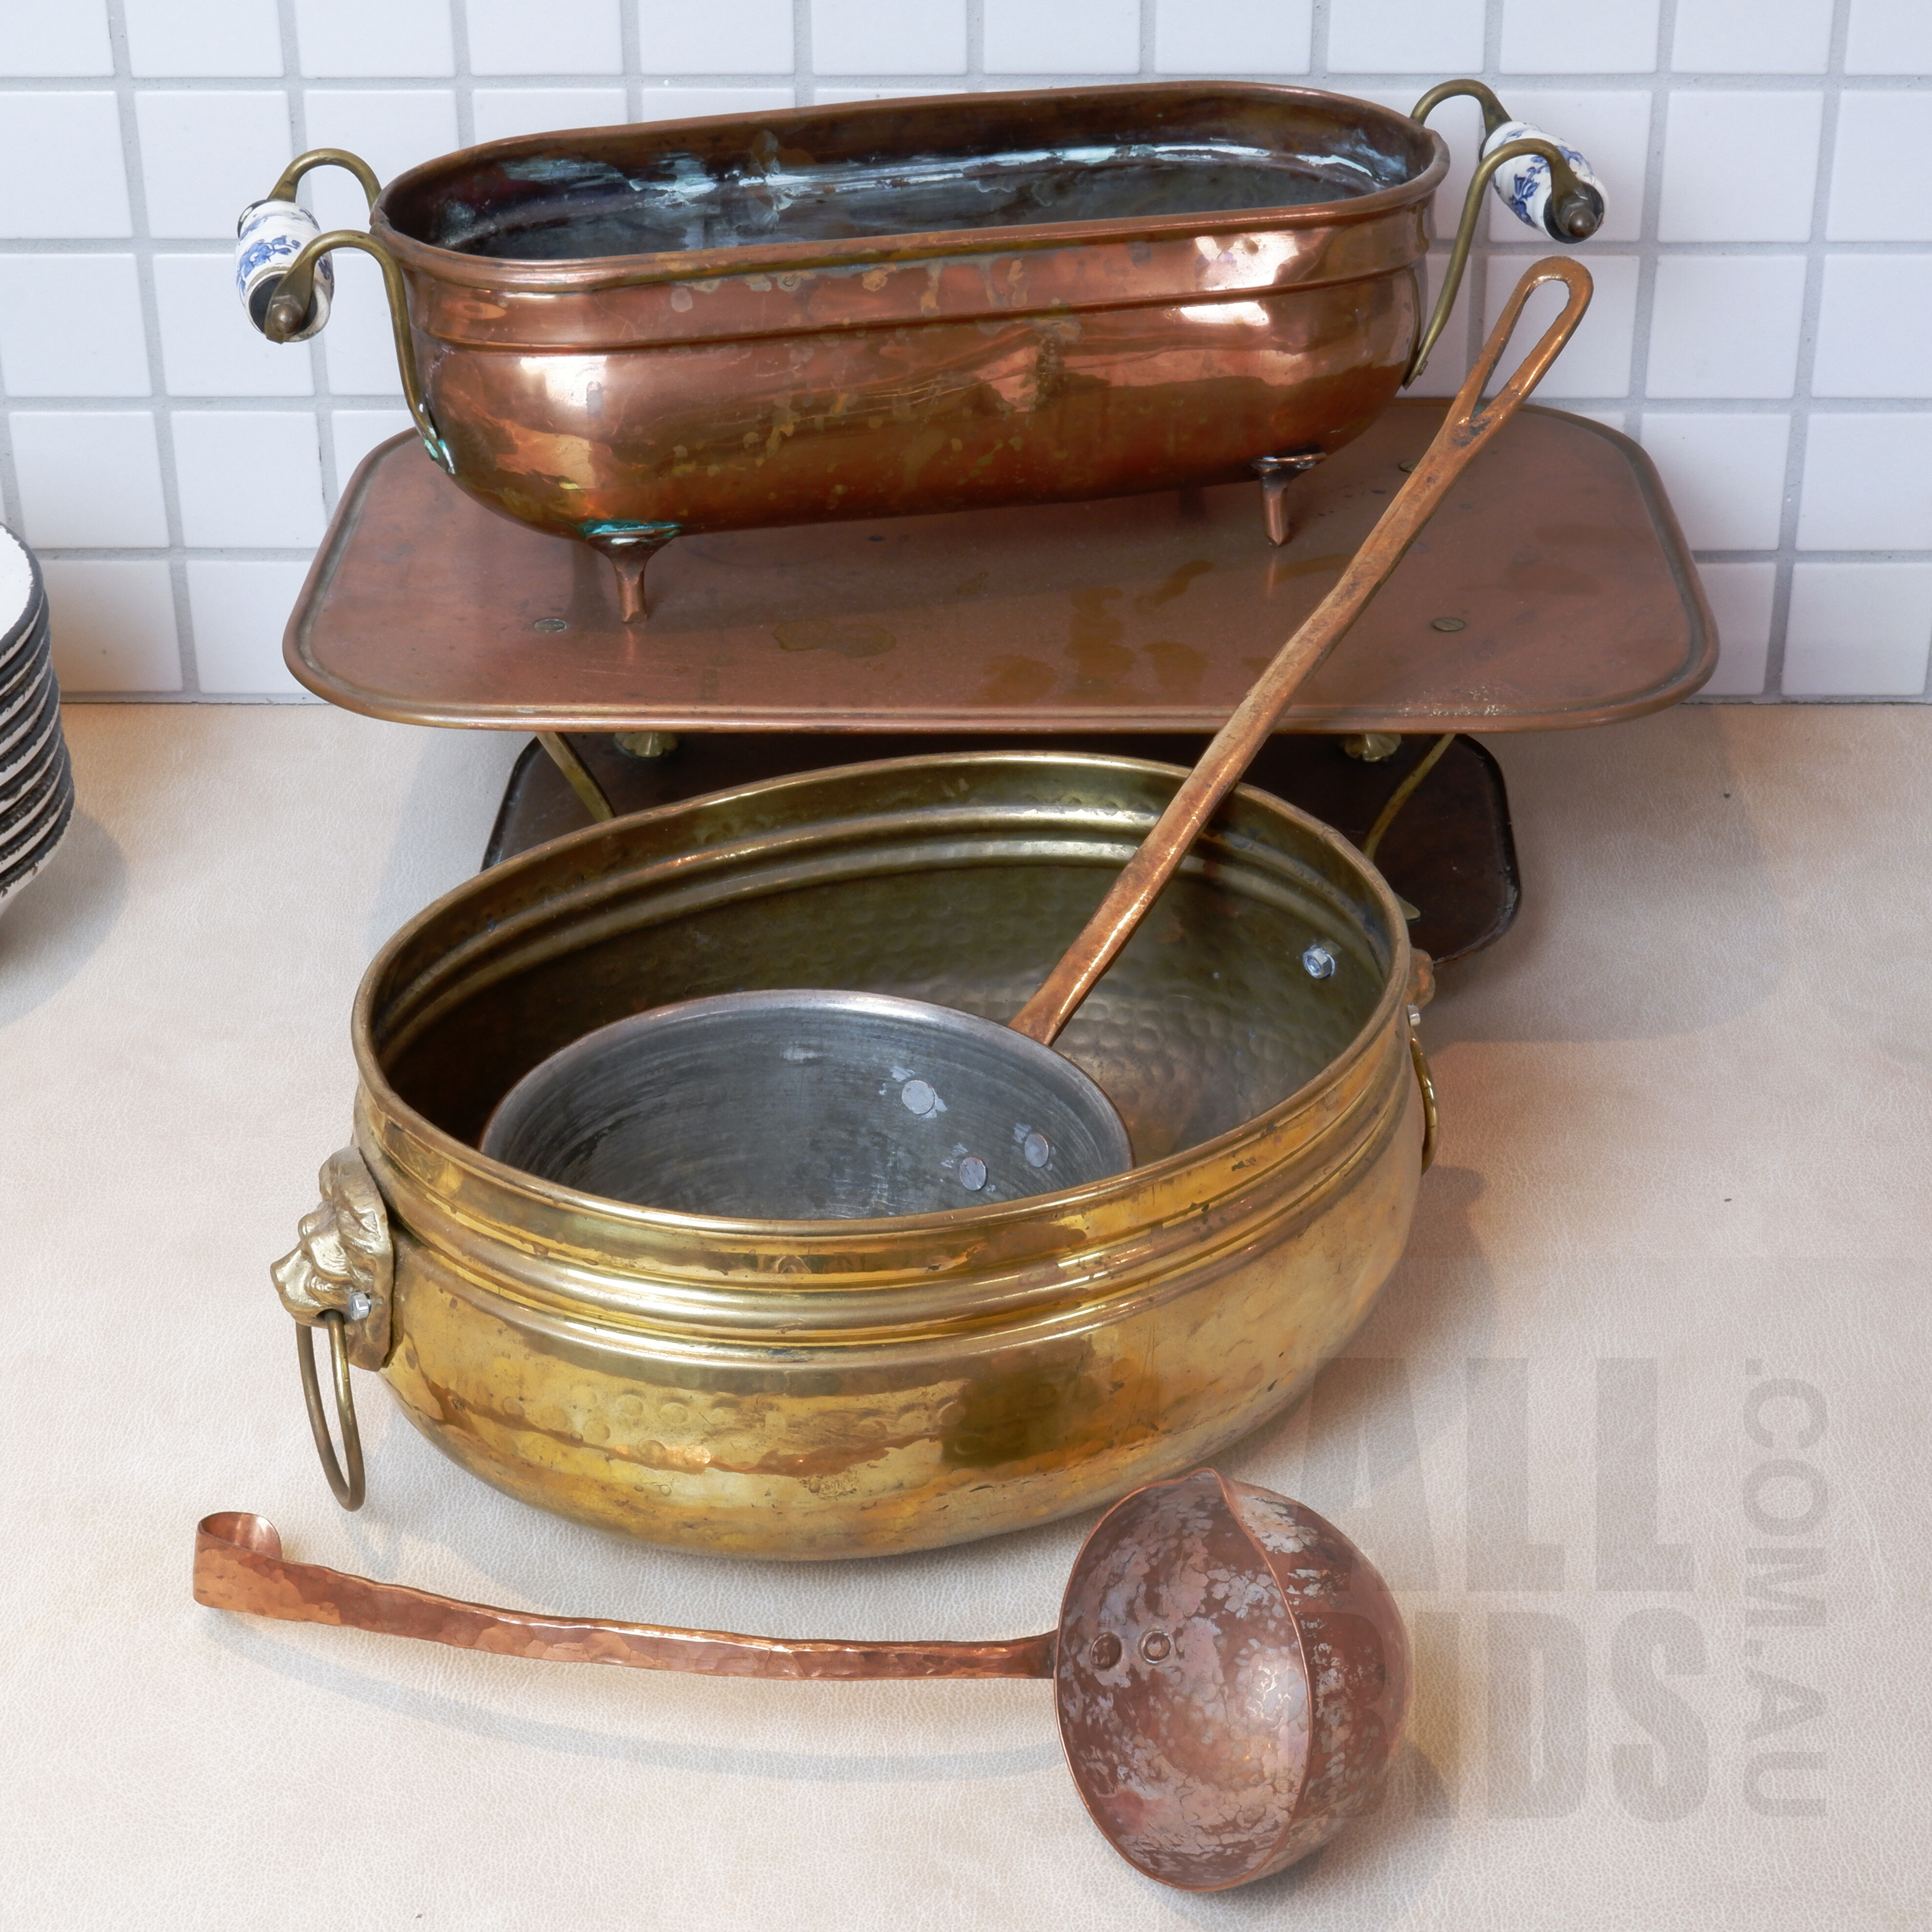 'Collection of Antique and Vintage Copper and Brassware, Including Large Ladle, Warming Stand and More'